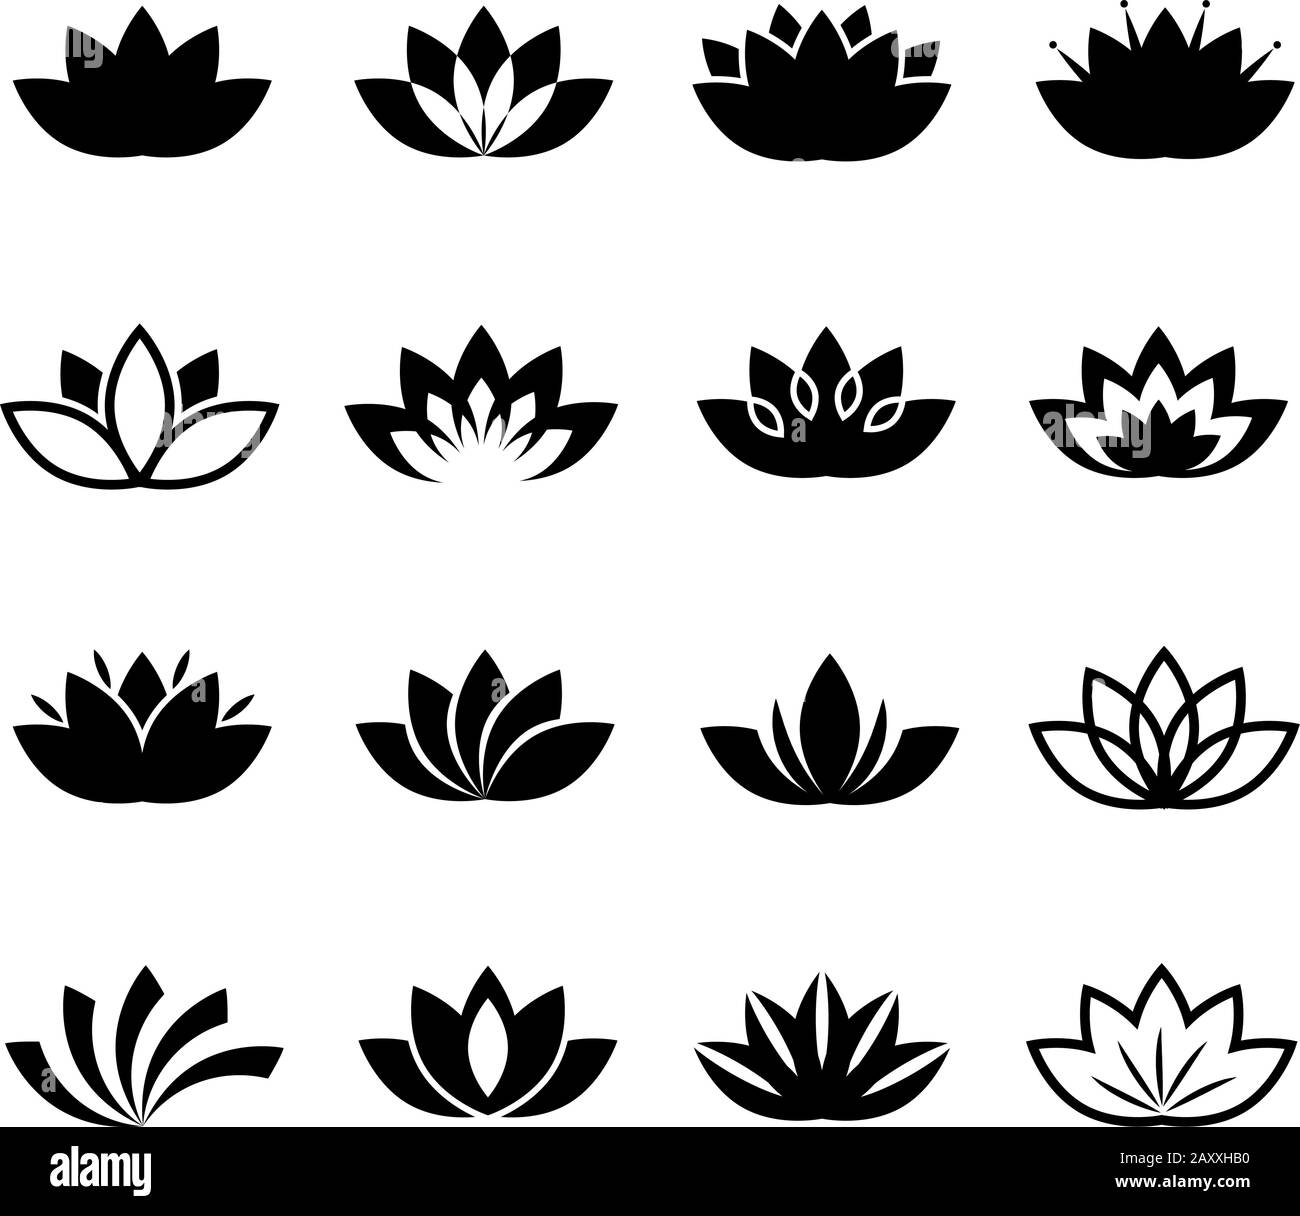 Lotus flower icons set. Vector lotus flowers signs or plant lotus blossom symbols Stock Vector